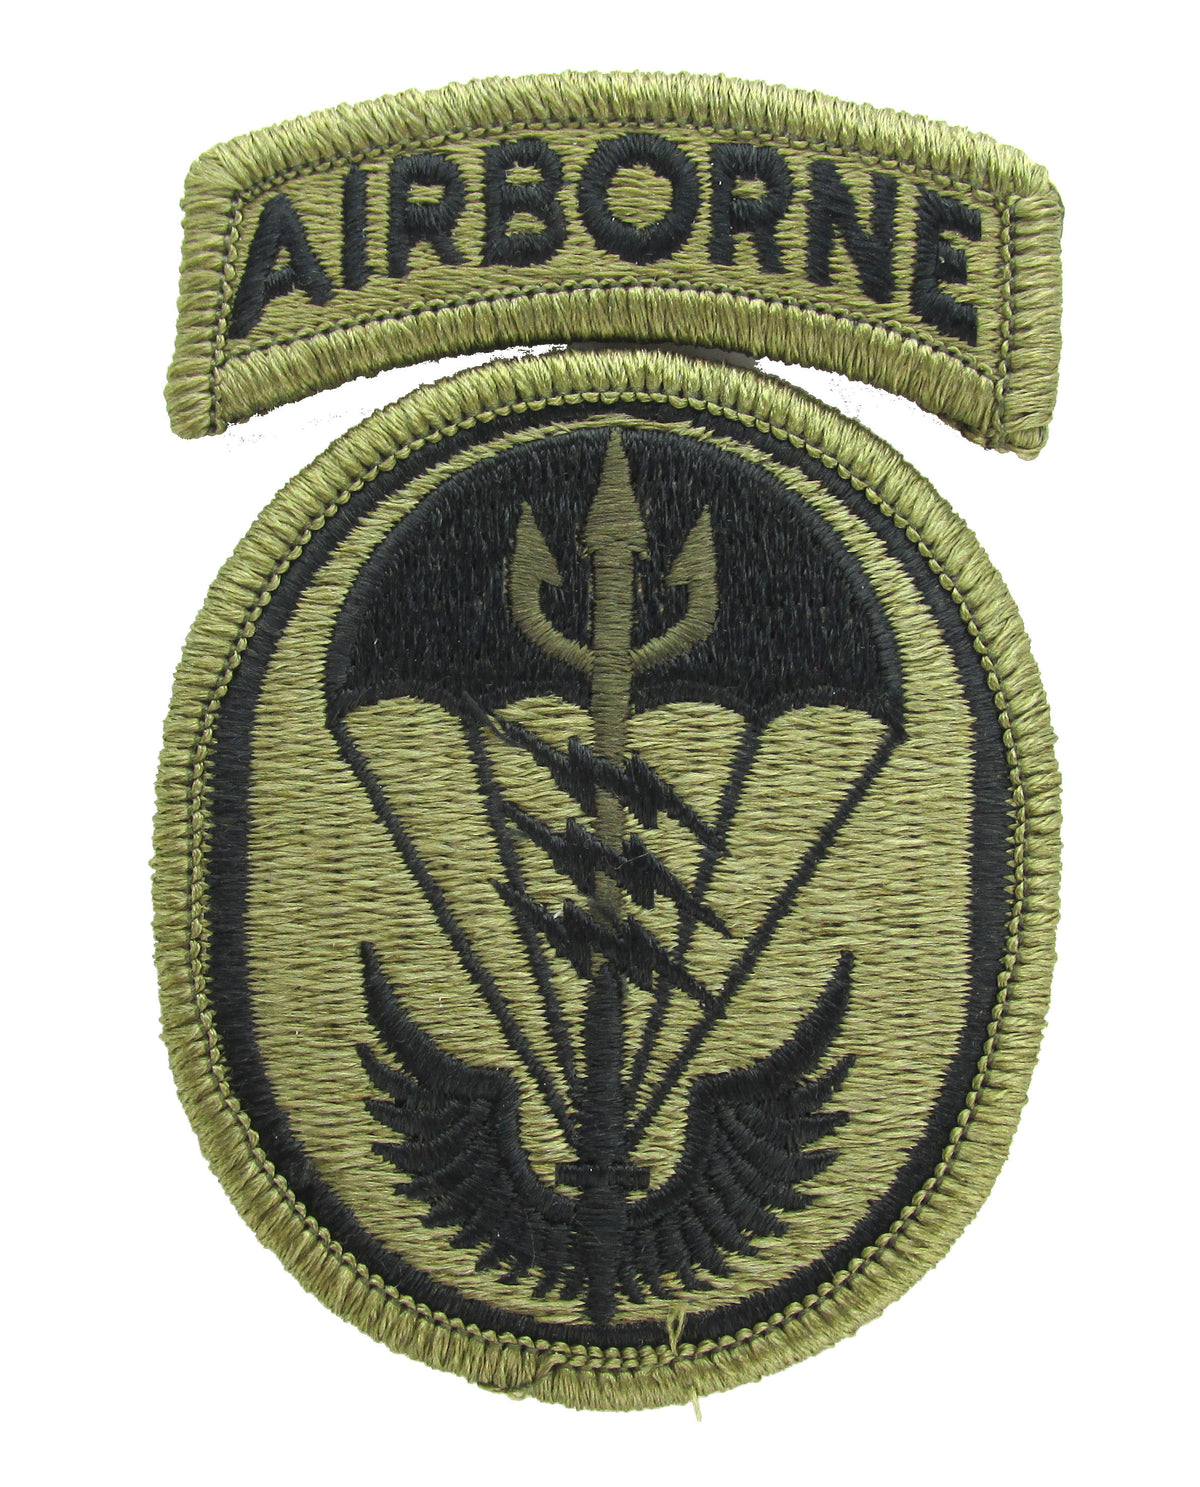 U.S. Army Special Operations Command South OCP Patch with Airborne Tab